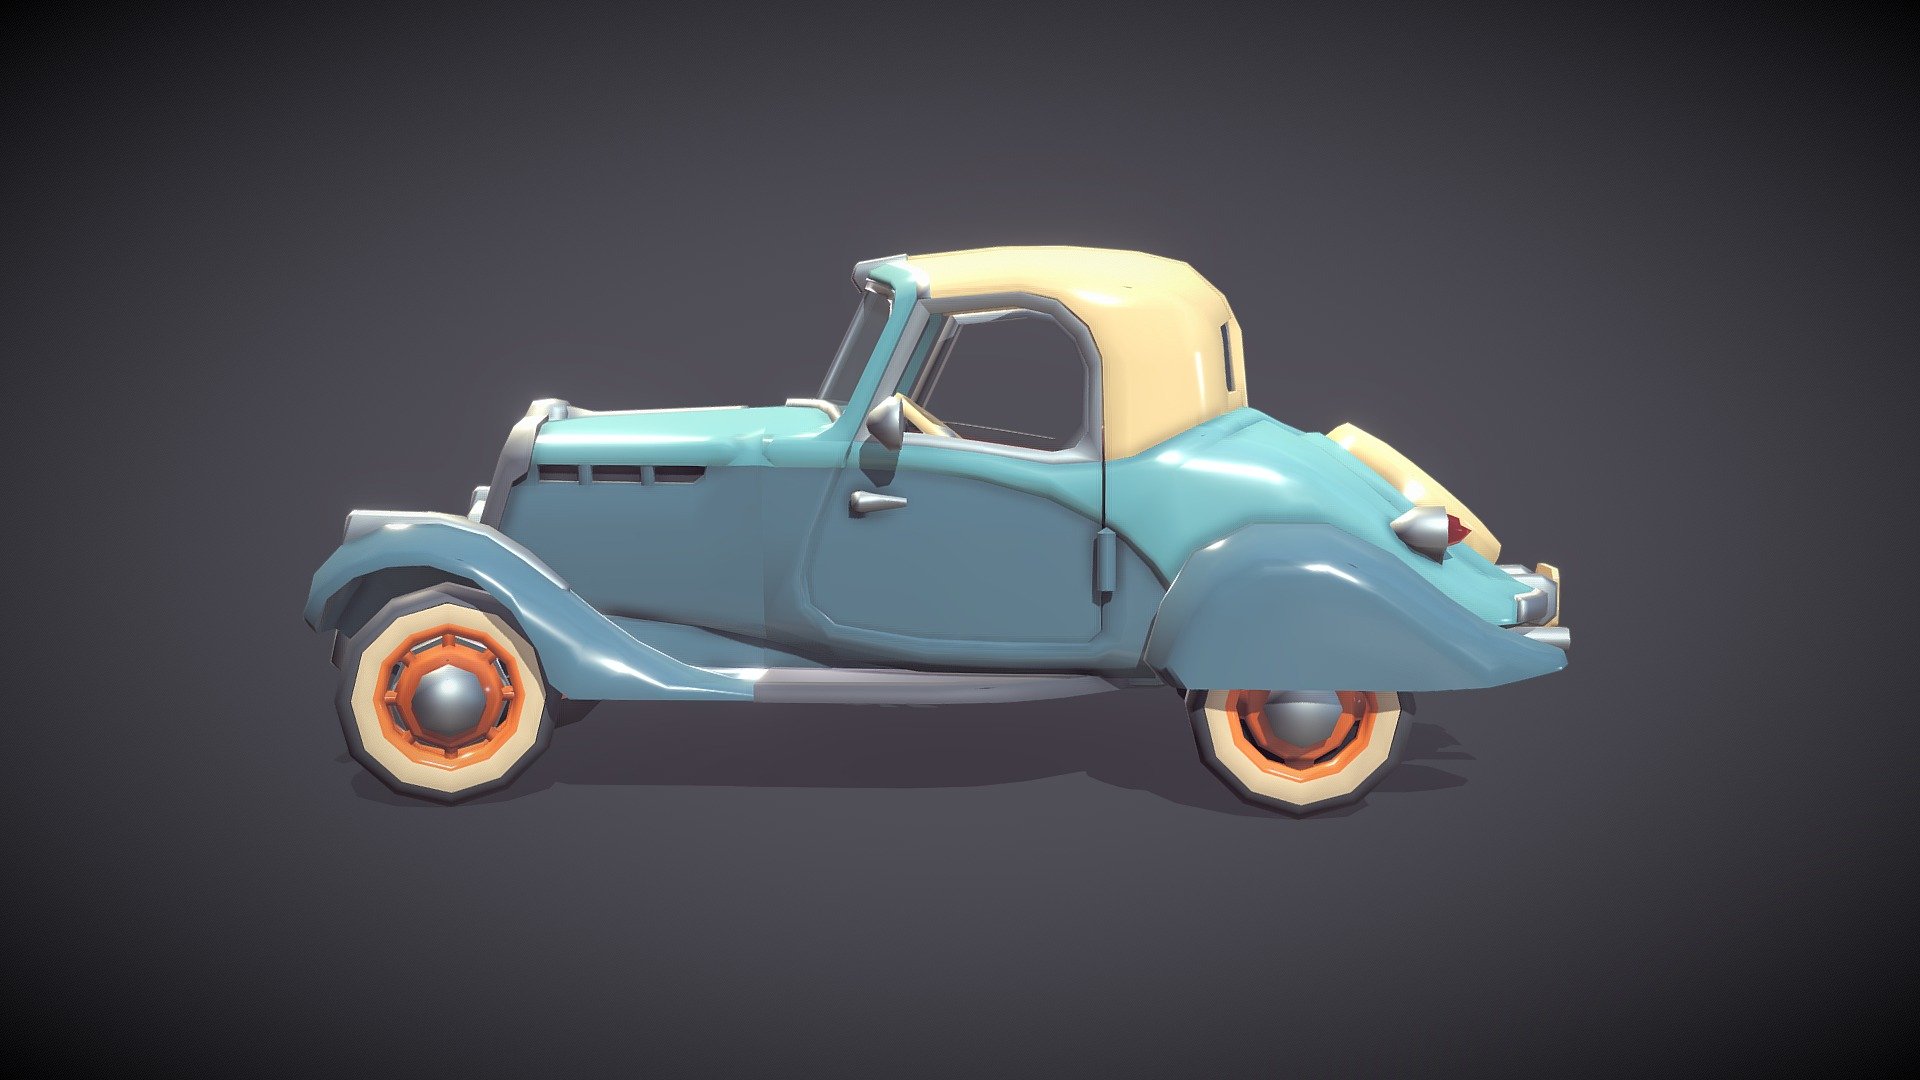 Another one of the upcoming (not soon) modular car set 3d model